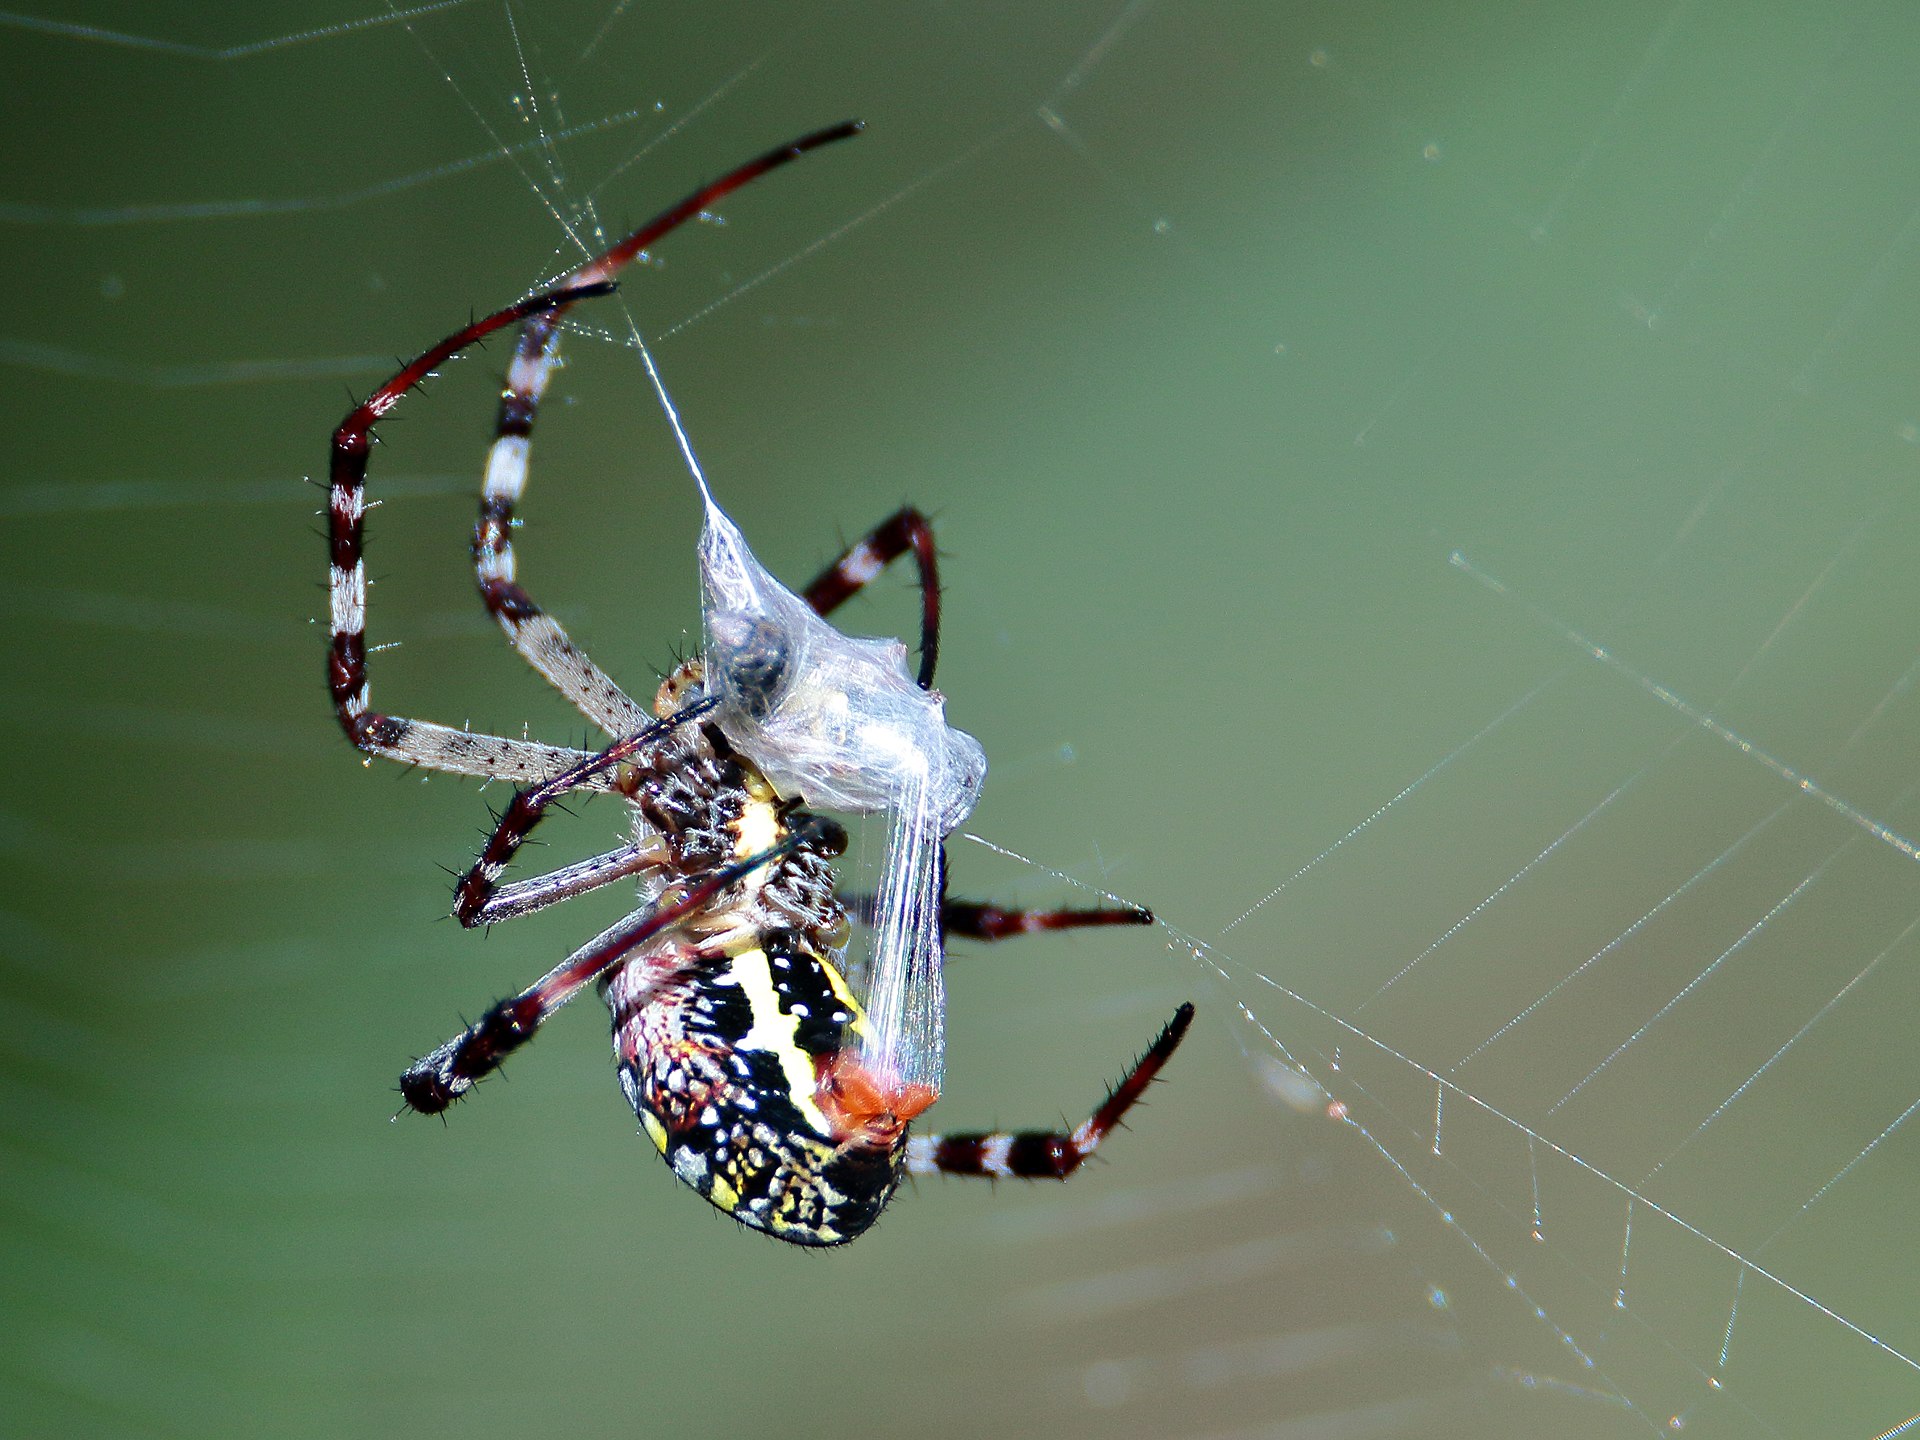 Spider silk fabrics could be an interesting future of highly abrasion resistant fabrics.